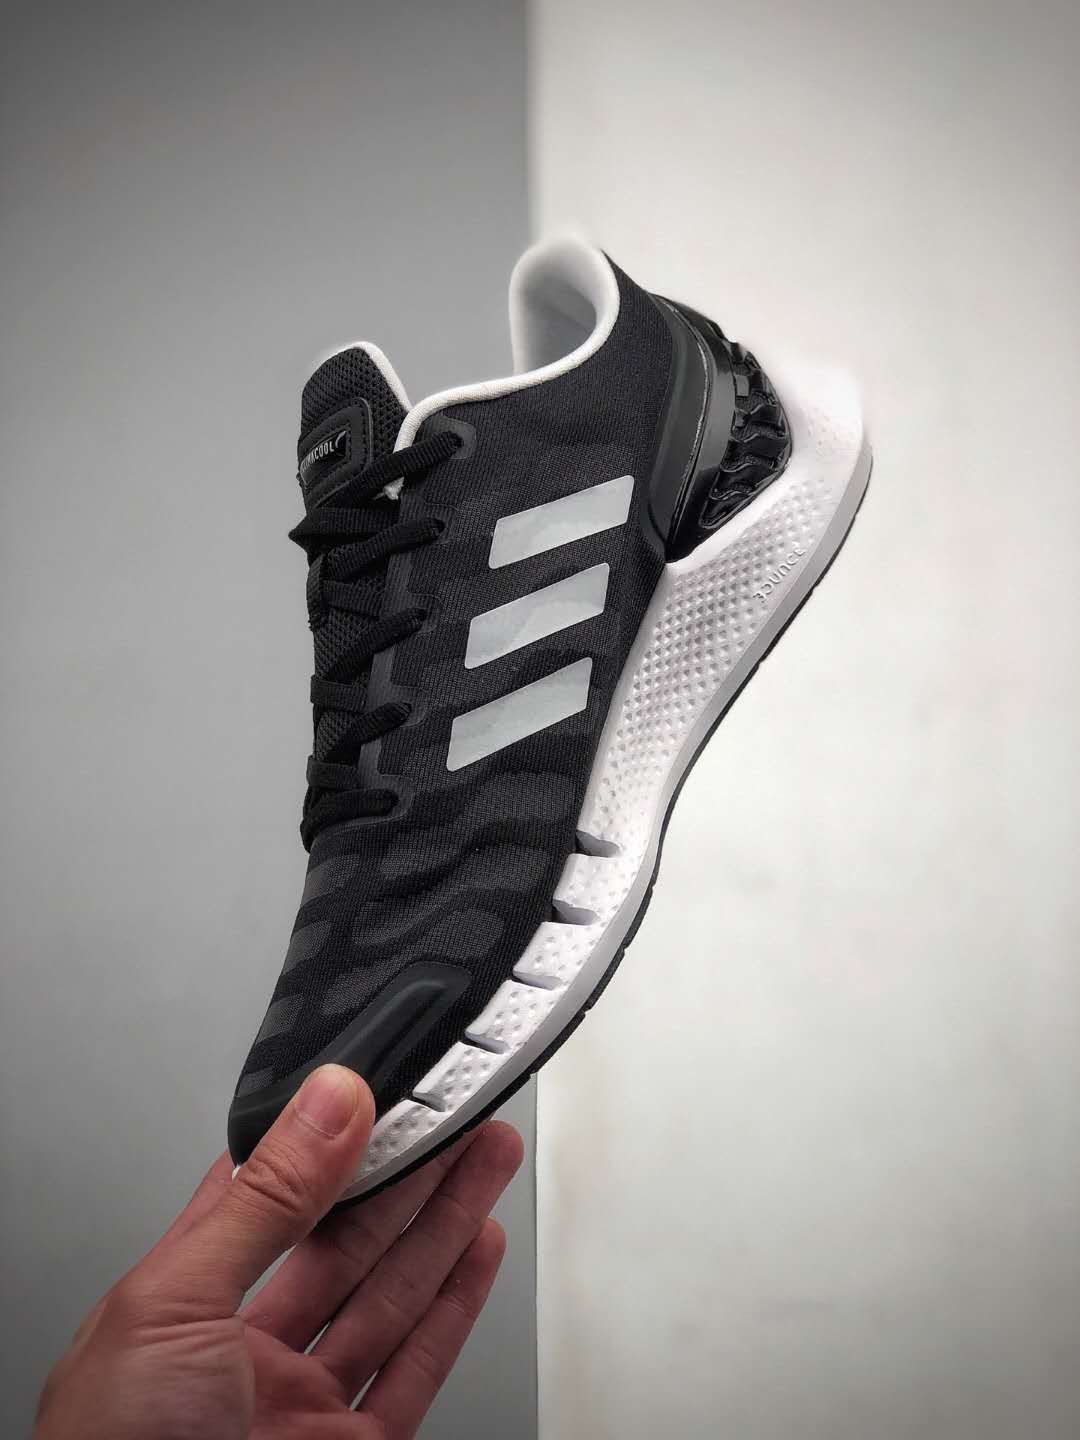 adidas Climacool Core Black Cloud White FW1223 - Stylish and Breathable Athletic Sneakers